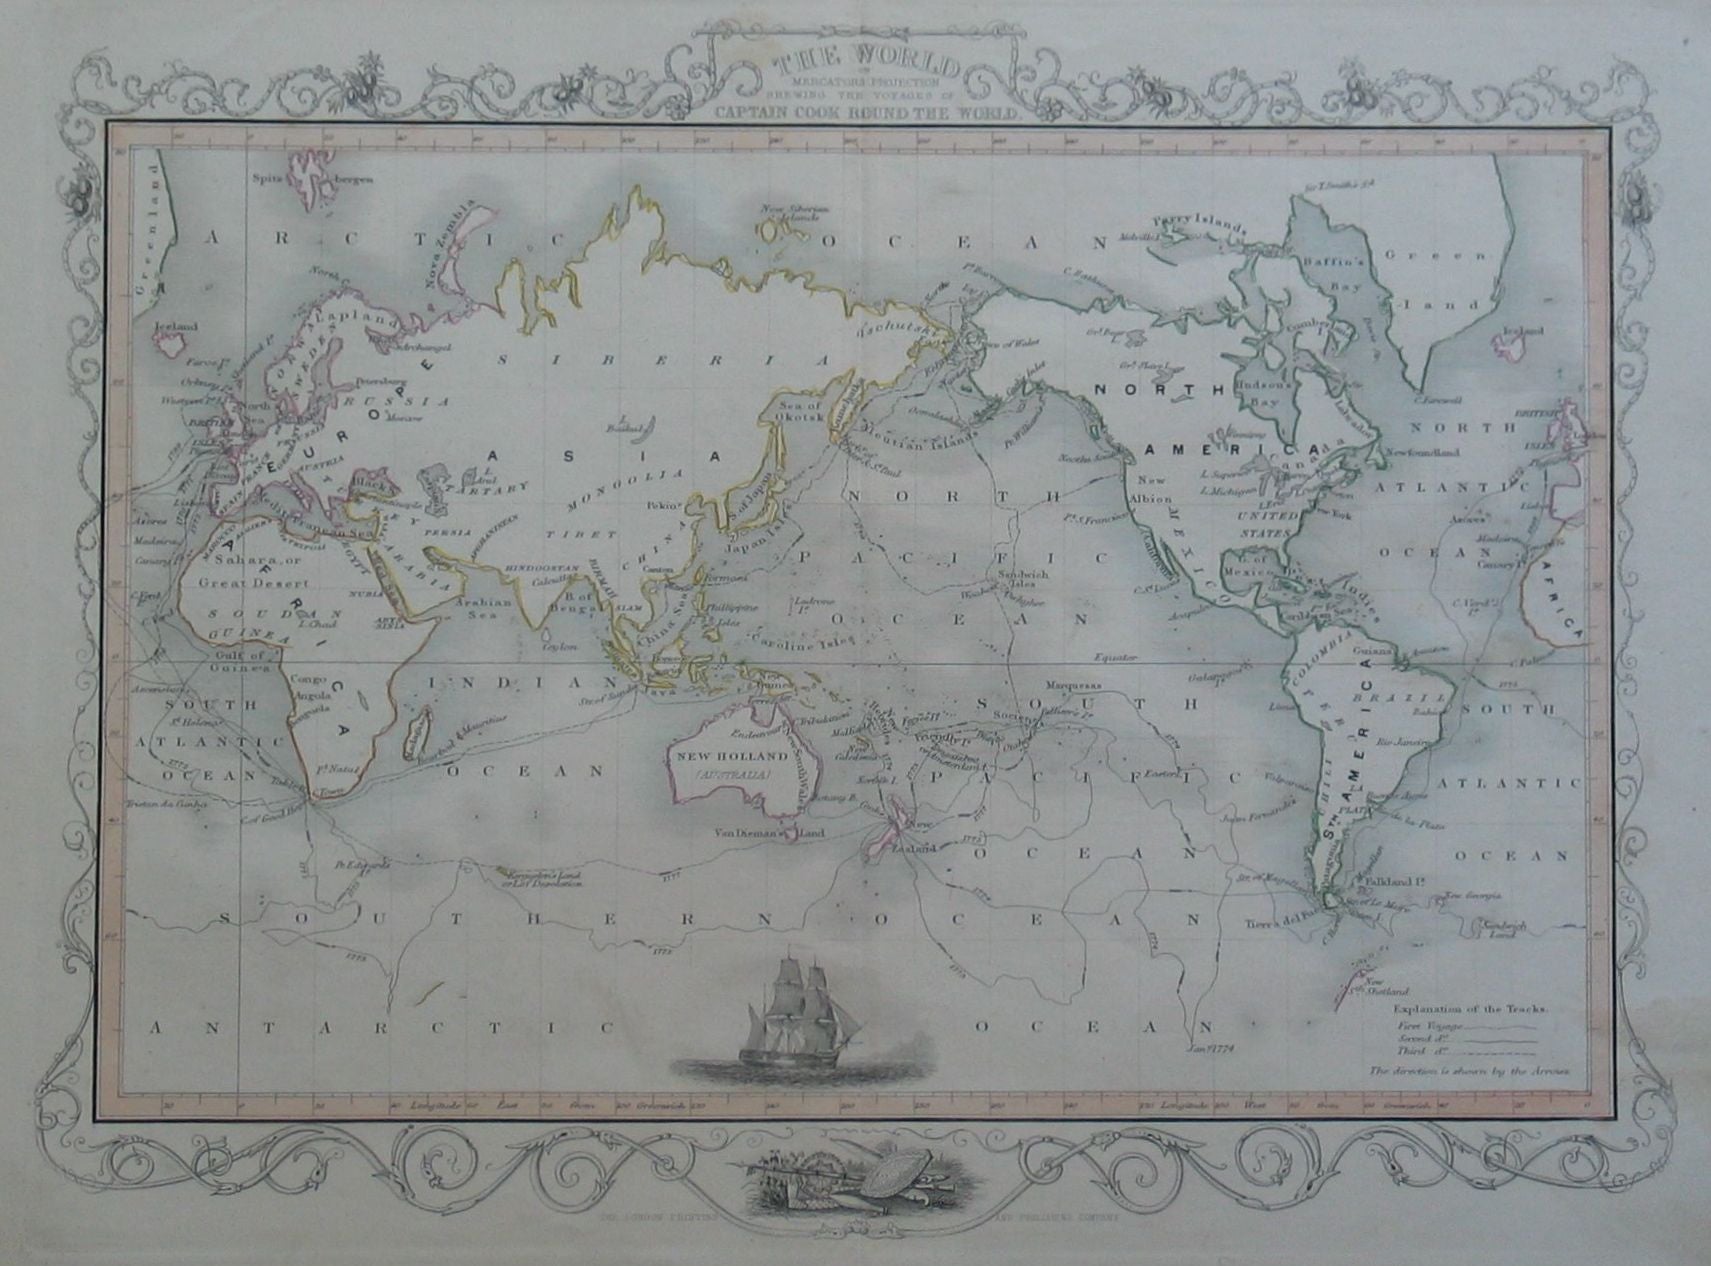 World Map showing Cook's Voyages [Reproduction]